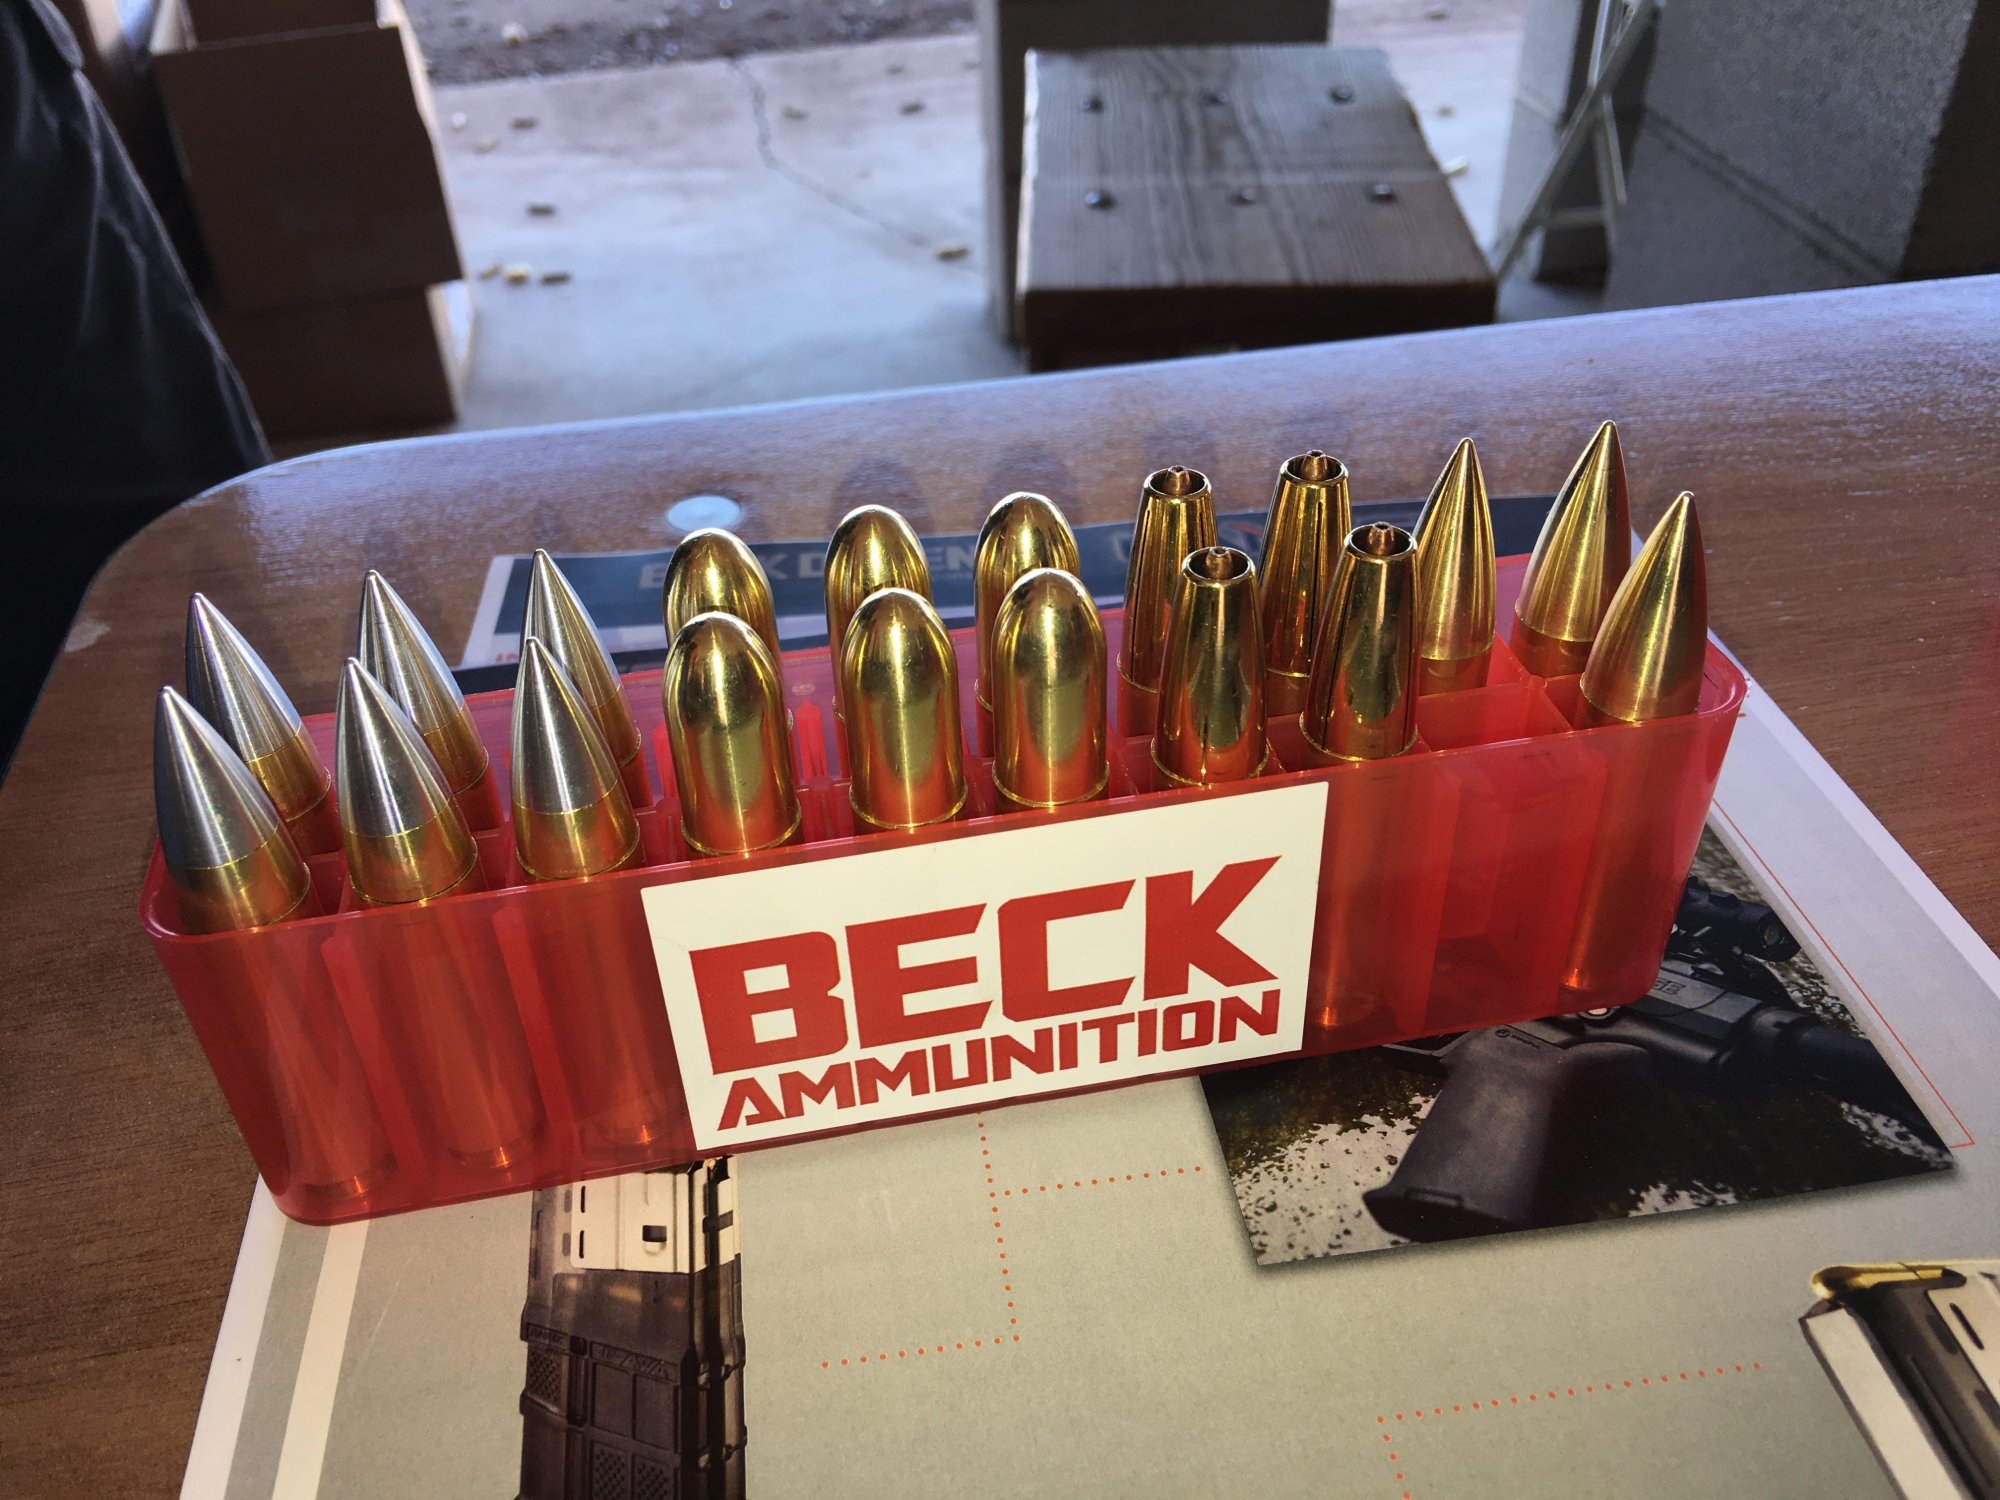 Beck_Defense_.510_Beck_Rifle_Carbine__Ammo_Ammunition_and_Lancer_Systems_L12_AWM_Advanced_Warfighter_Magazine_at_SHOT_Show_Industry_Day_2016_David_Crane_DefenseReview.com_DR_5.jpg